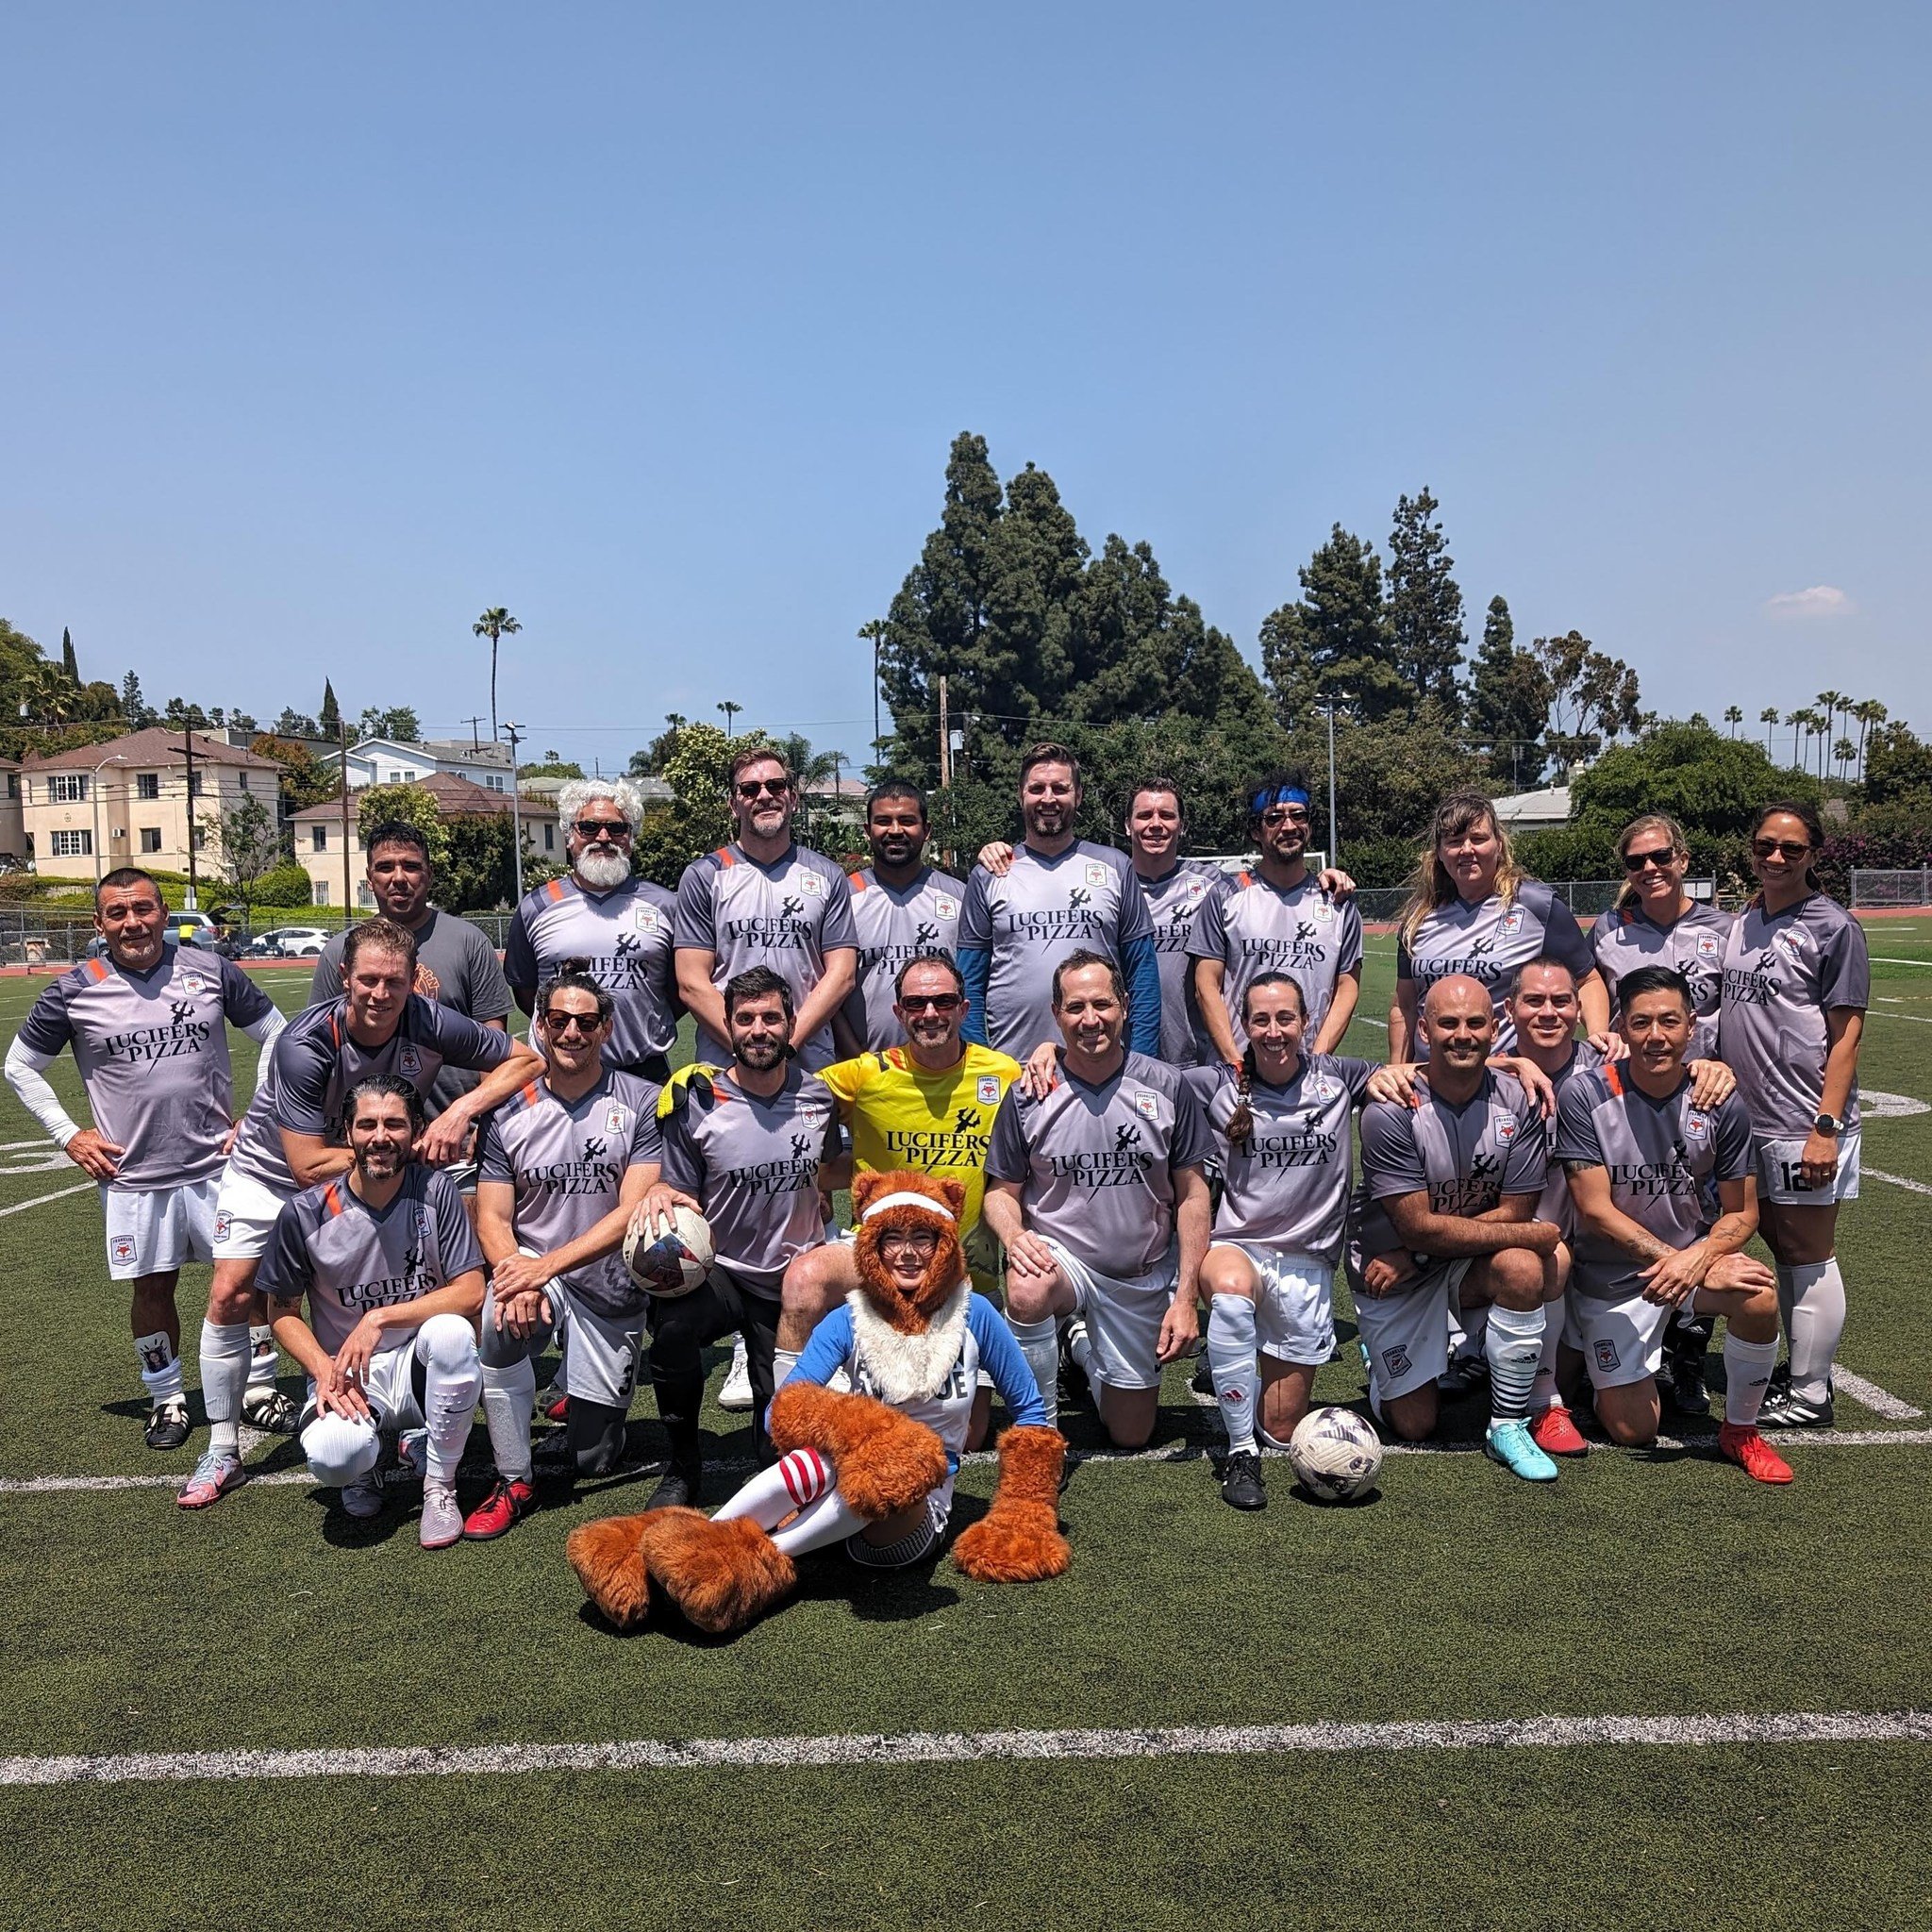 Let&rsquo;s congratulate the Franklin Parent Soccer team on a great season! ⚽️ Here&rsquo;s the news from yesterday&rsquo;s tournament&hellip; The 12th Annual Los Silver Lake Invitational concluded yesterday with a special day of soccer and fun at Ma